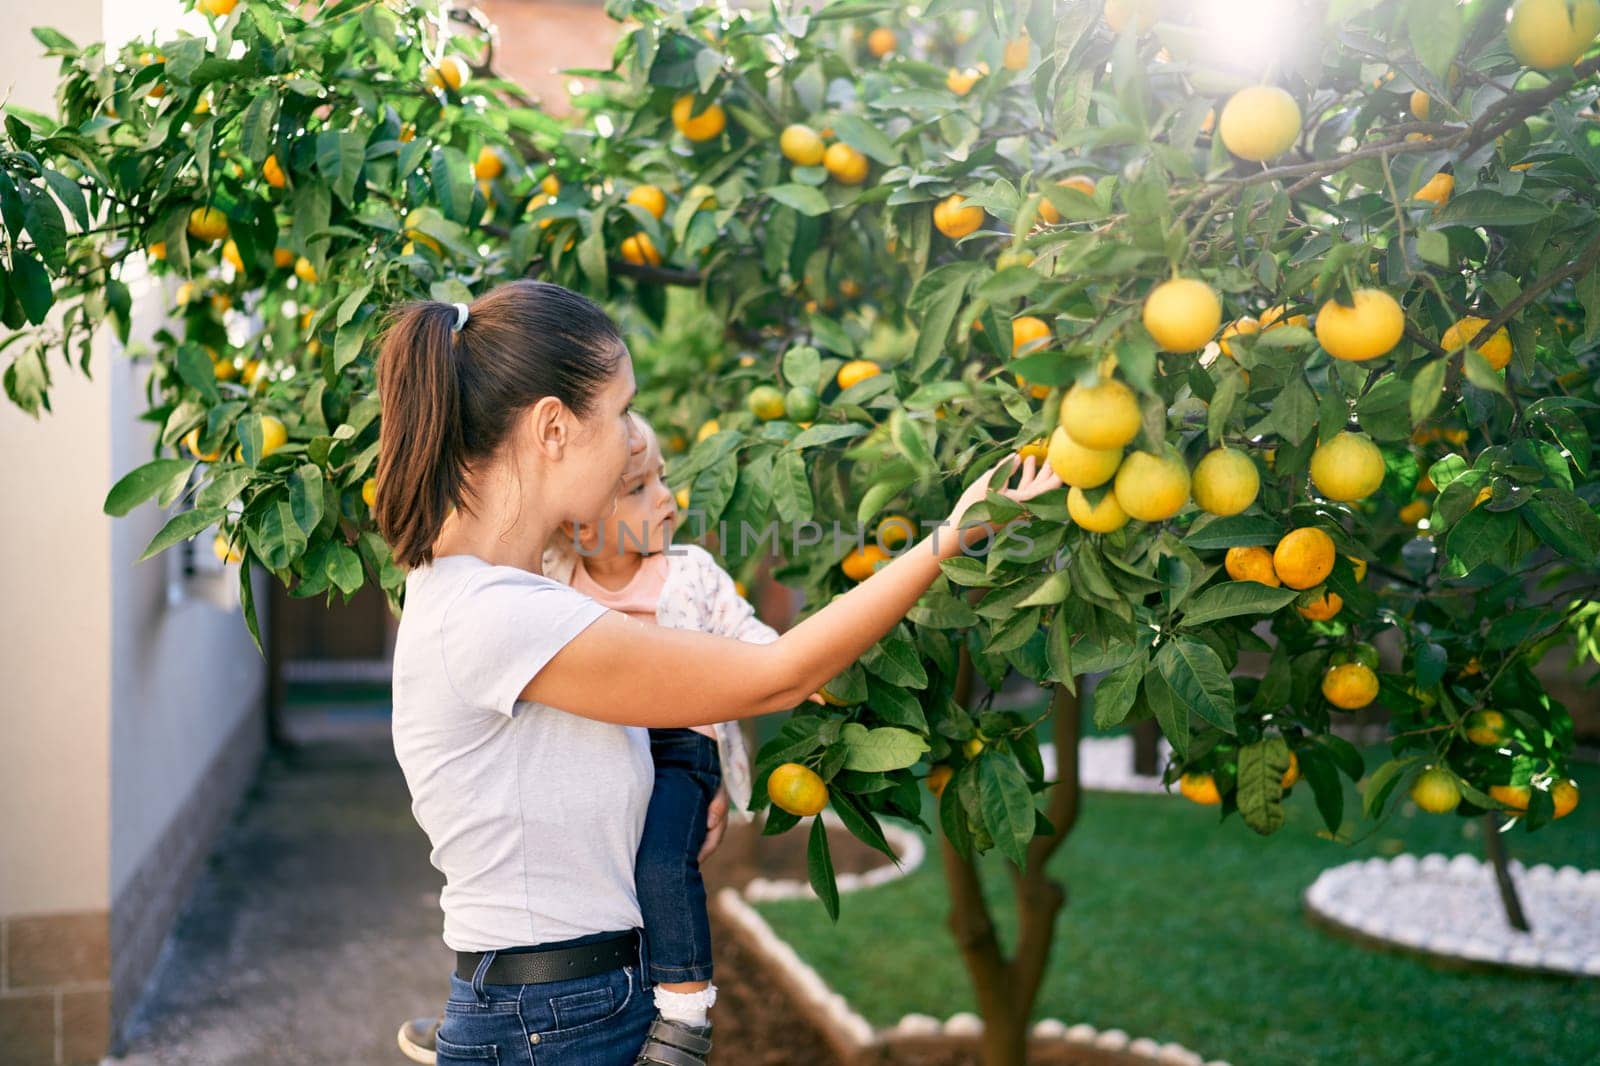 Mom shows tangerines on tree branches in the garden to a little girl in her arms by Nadtochiy